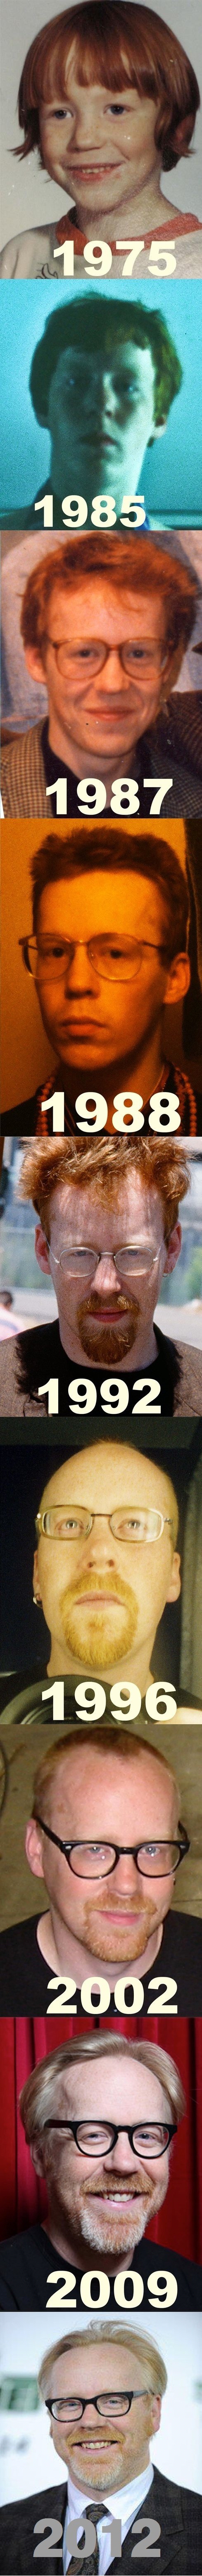 Aging like a boss... 1992 was a scary year